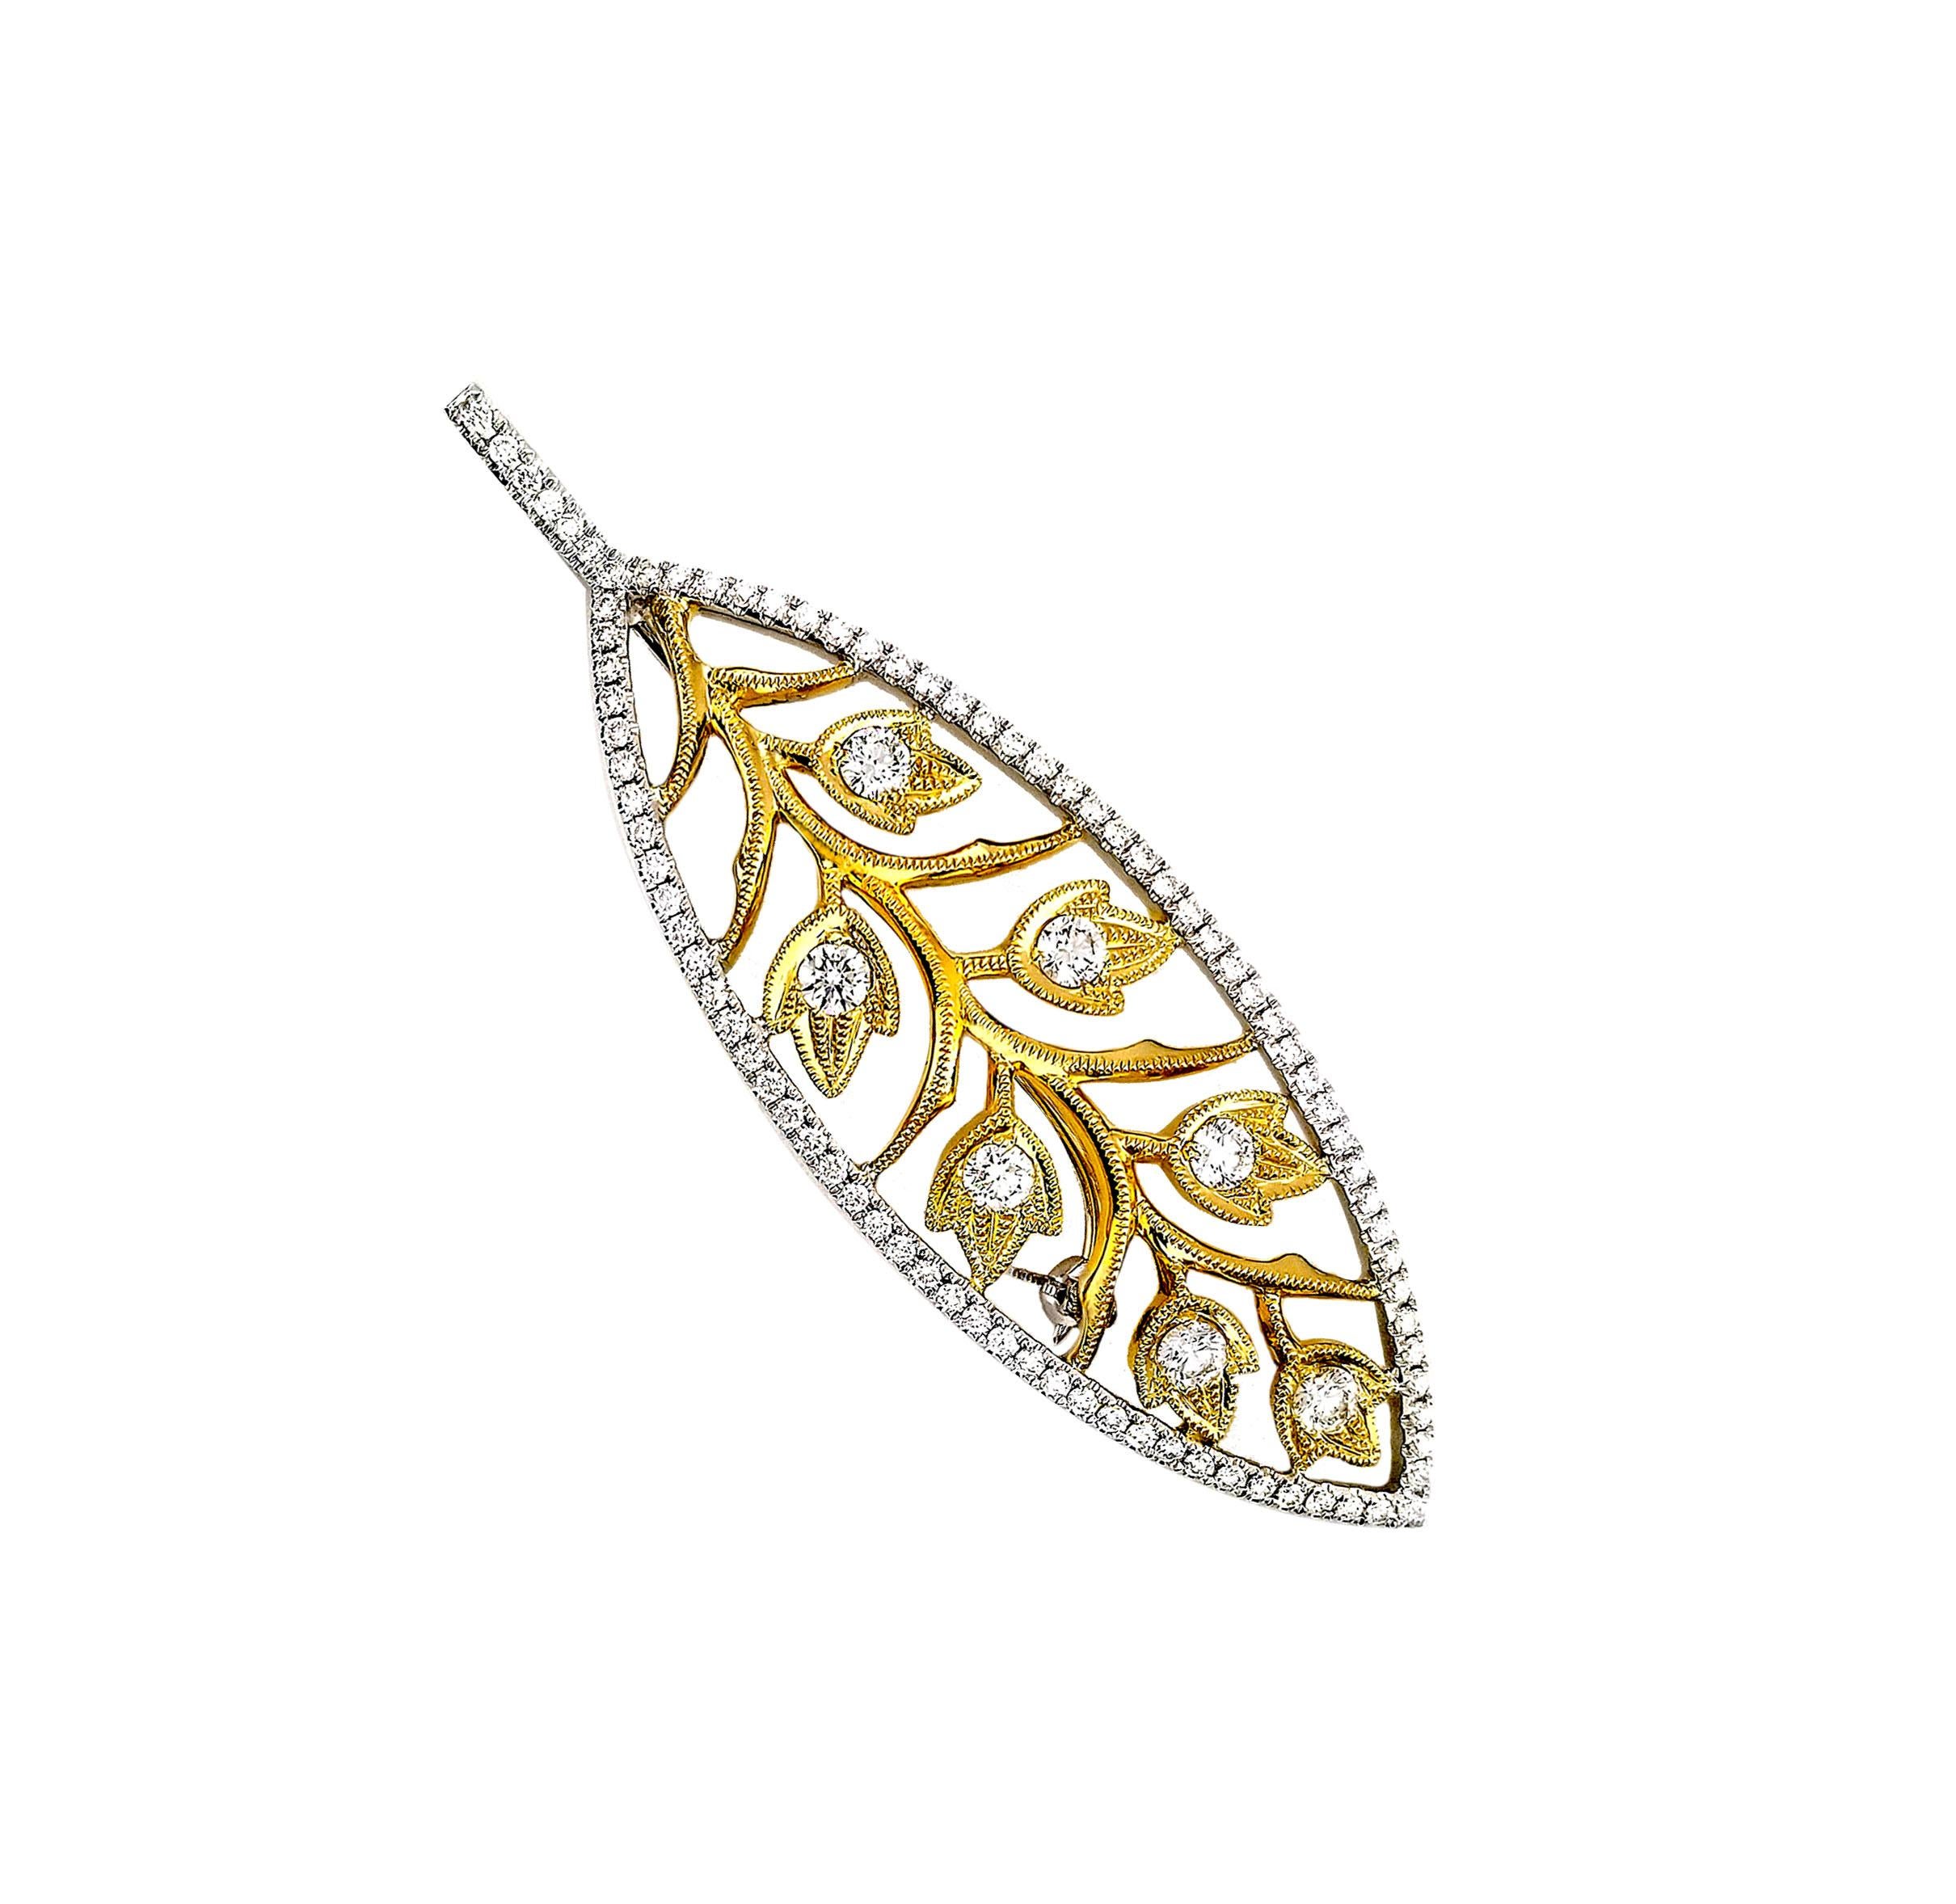 Vitolo 18 Karat Gold Leaf Motif Diamond Brooch In New Condition For Sale In Los Angeles, CA